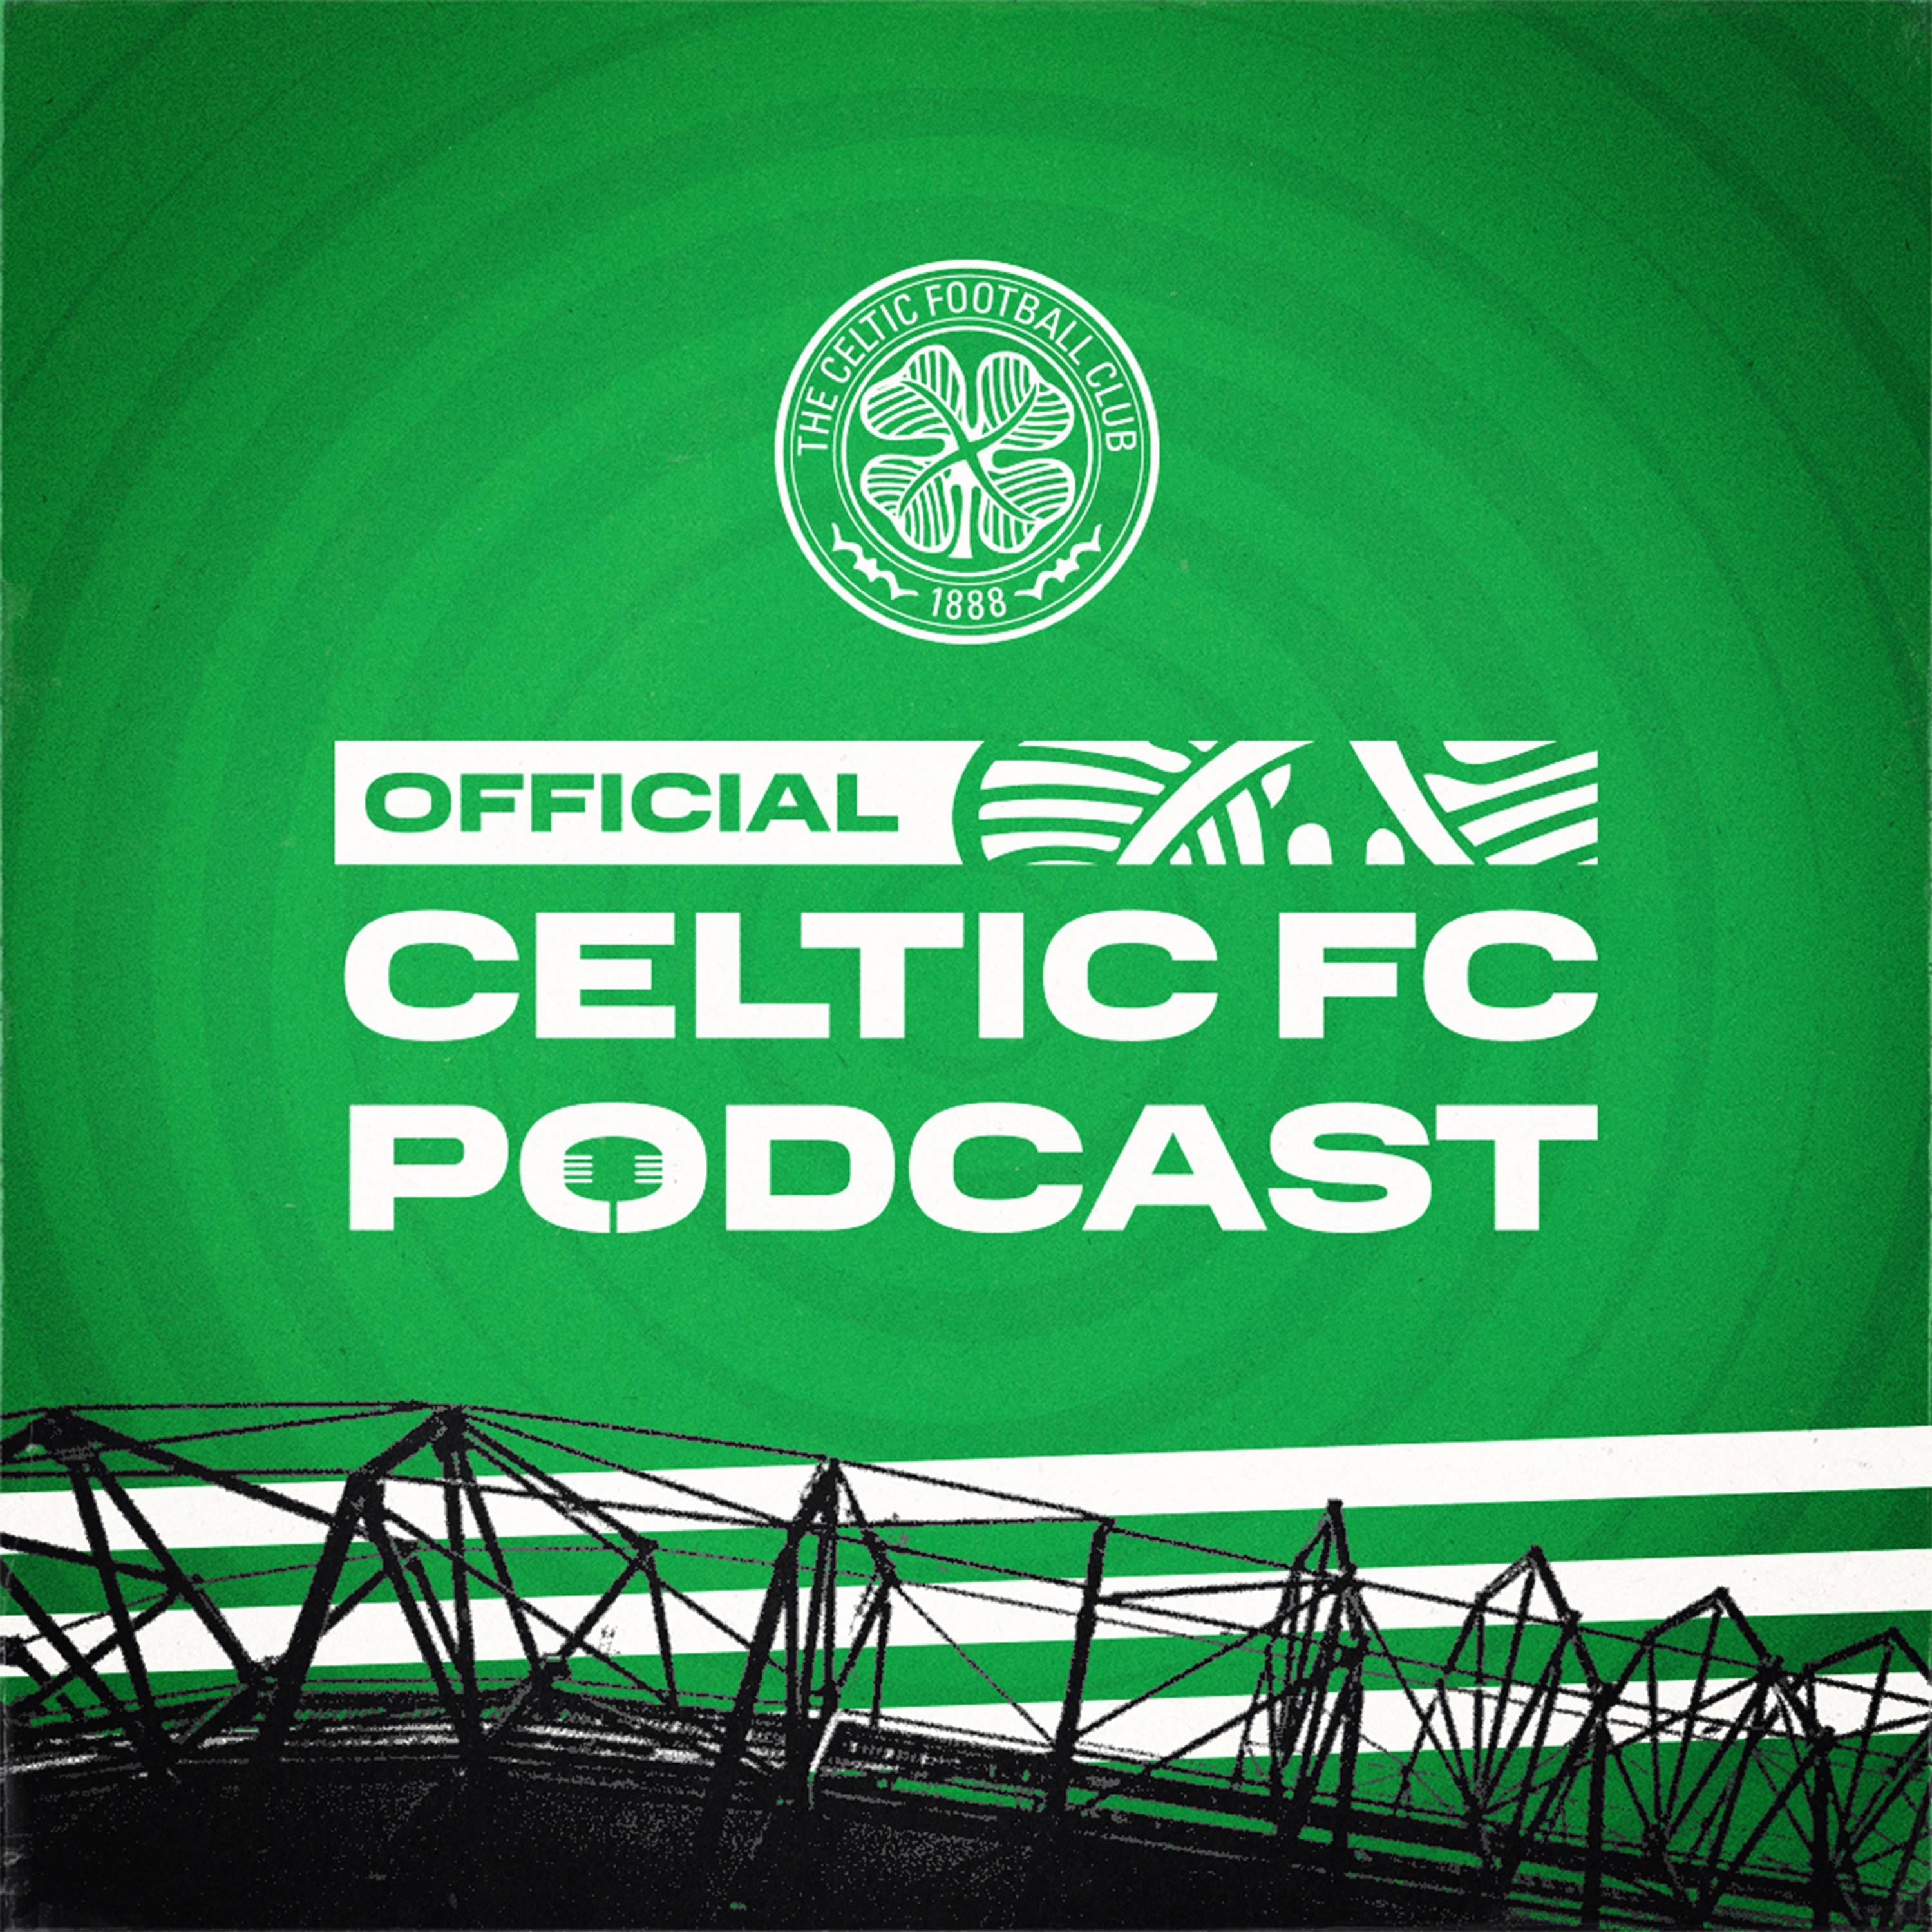 Unmissable & hilarious LIVE podcast with Stephen Welsh, Maik Nawrocki & Alistair Johnston | Celtic FC x JD Sports